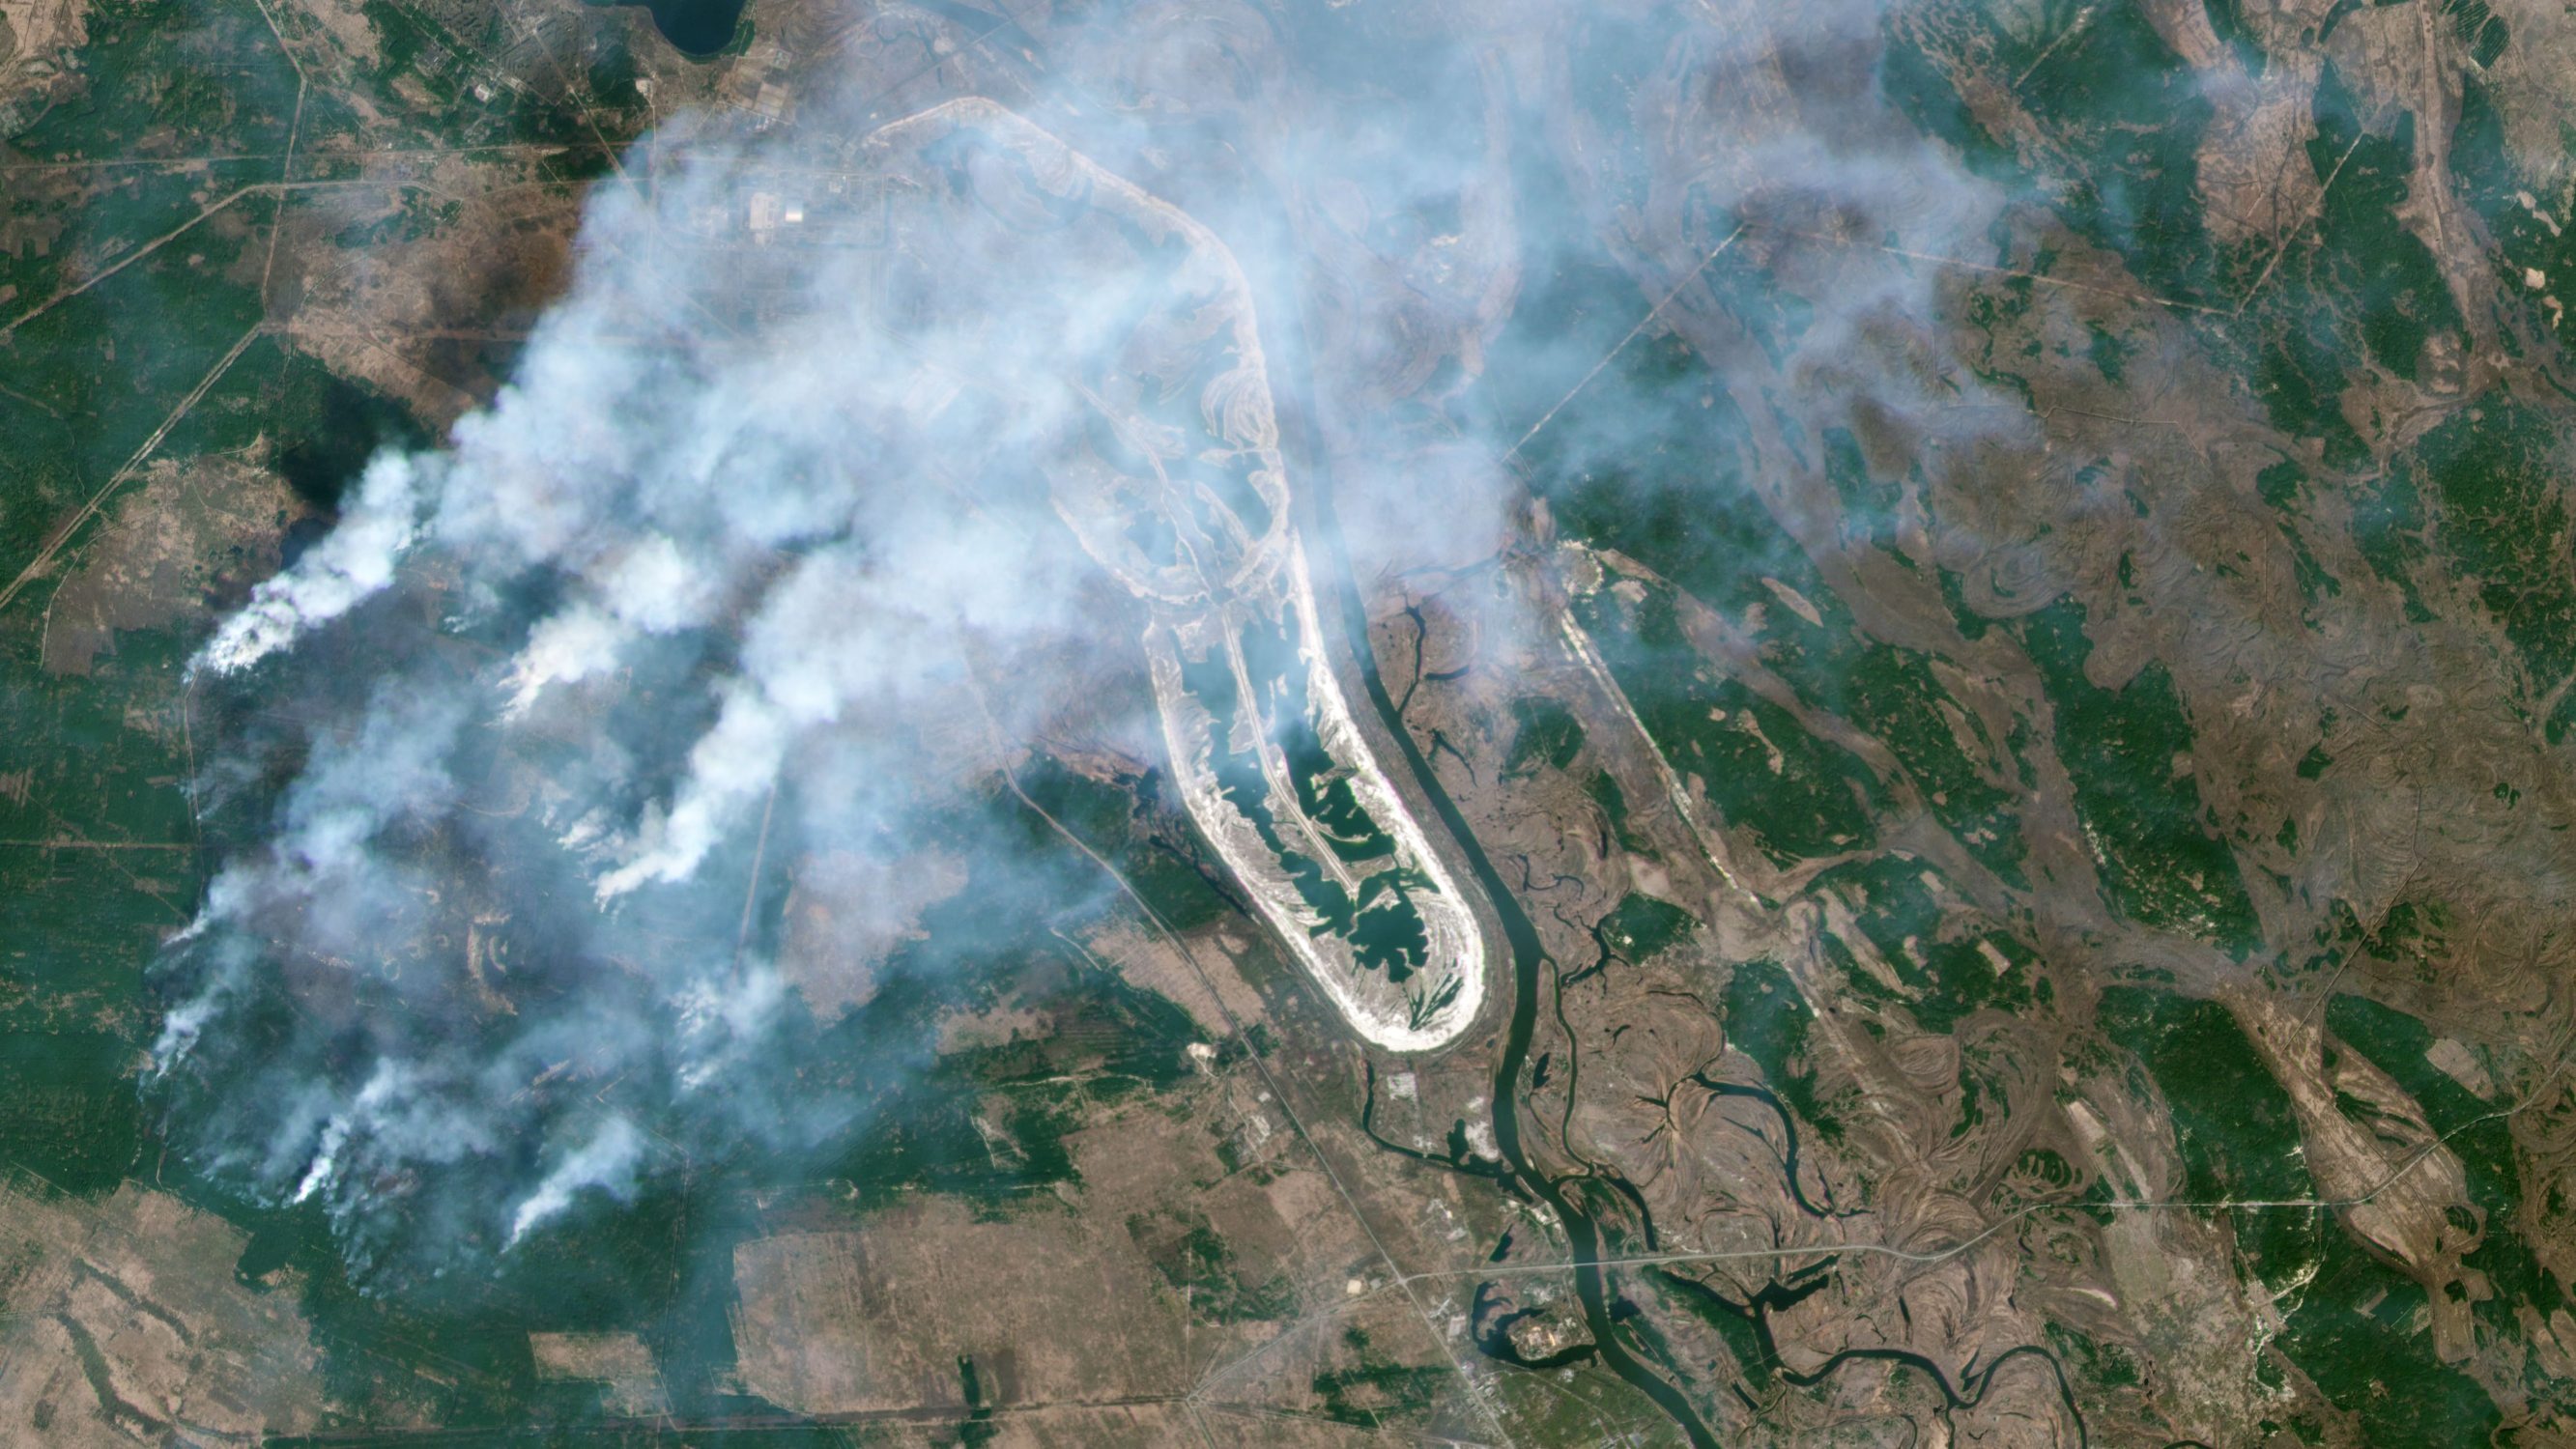 TOPSHOT - This handout satellite image taken on April 9, 2020 and released on April 15, 2020 by 2020 Planet Labs shows a forest fire burning in the Chernobyl exclusion zone in Ukraine, not far from the nuclear power plant. - Ukraine said on April 14 only small fires remained in the Chernobyl exclusion zone, with rain coming to the rescue in the battle against a huge blaze. The fire broke out 10 days ago at the scene of the world's worst nuclear accident in 1986 and on April 13 had reached just 1.5 kilometers from the protective dome over the ruined reactor, Greenpeace Russia said. (Photo by - / Planet Labs Inc. / AFP) / RESTRICTED TO EDITORIAL USE - MANDATORY CREDIT 